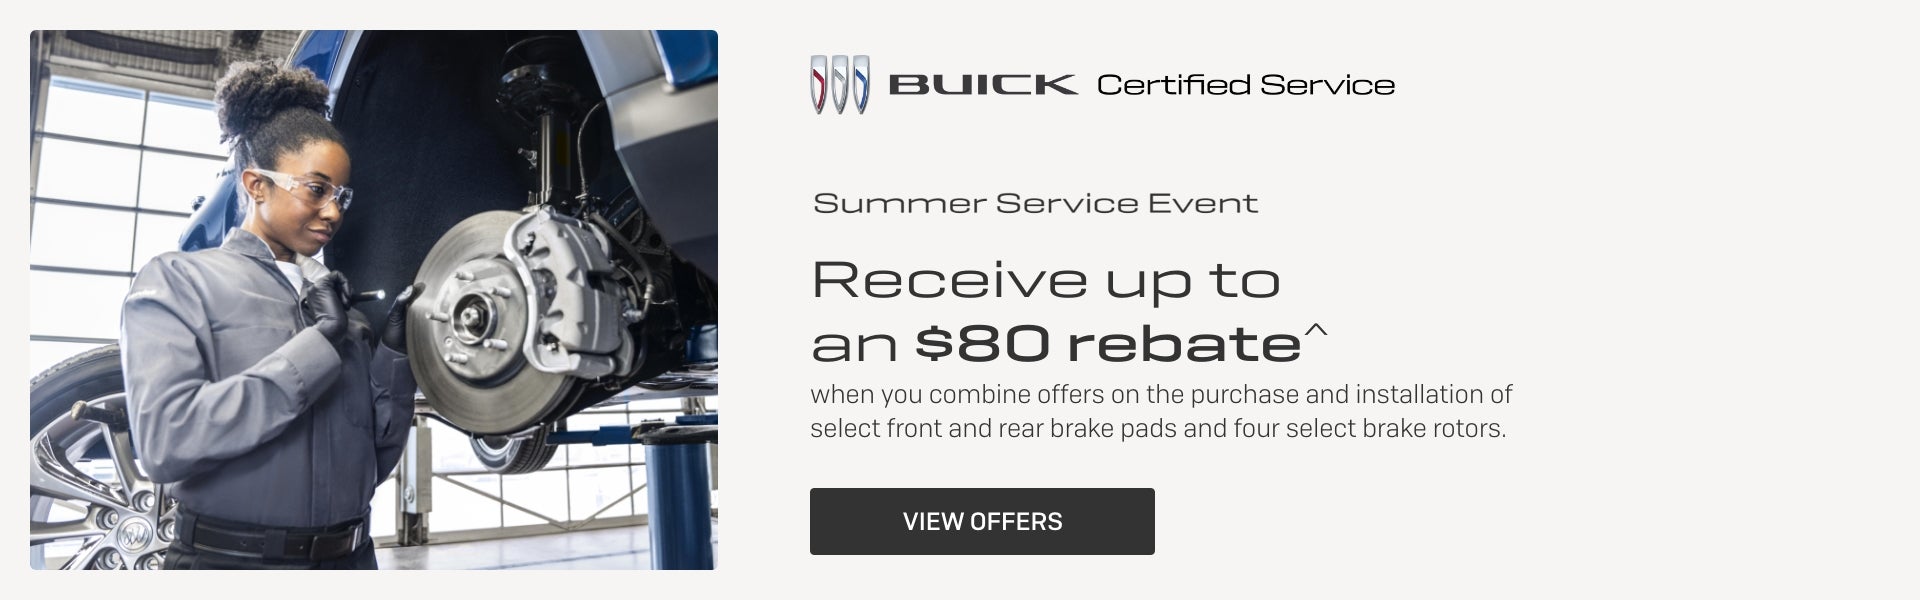 Receive up to an $80 rebate on brakes